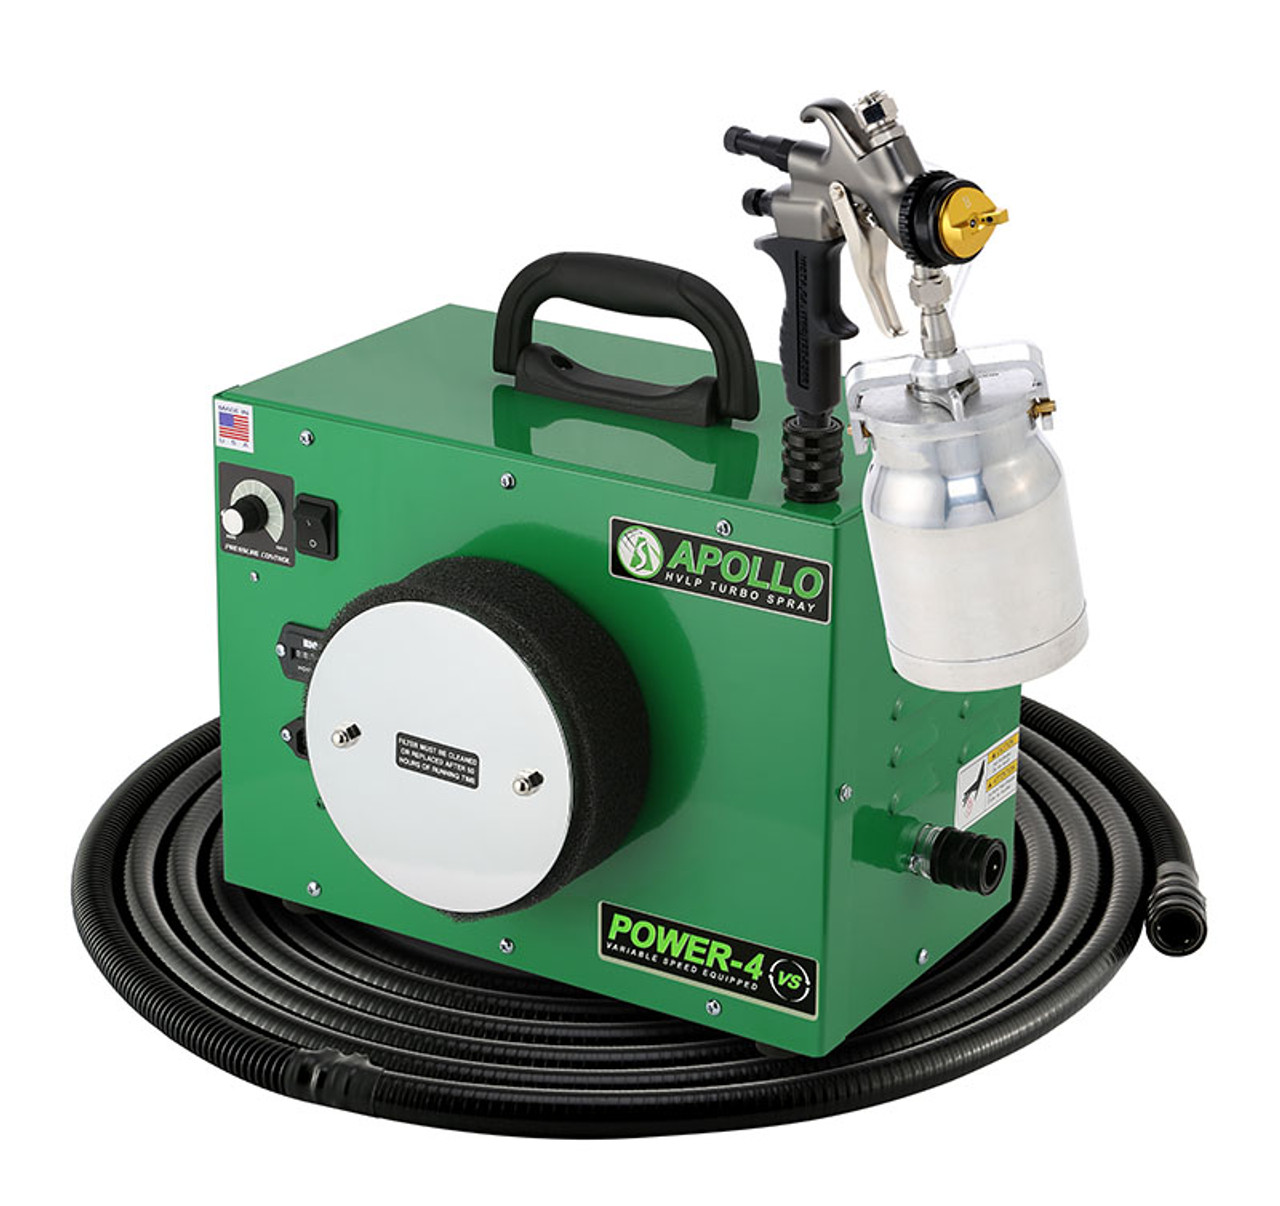 Apollo - 4-stage, POWER 4 VS; 110 volt motors with 29' air flex hose and A7700GT-600 spray gun and A5034A 600cc Gravity Feed cup. (PW4VS1107700GT6)